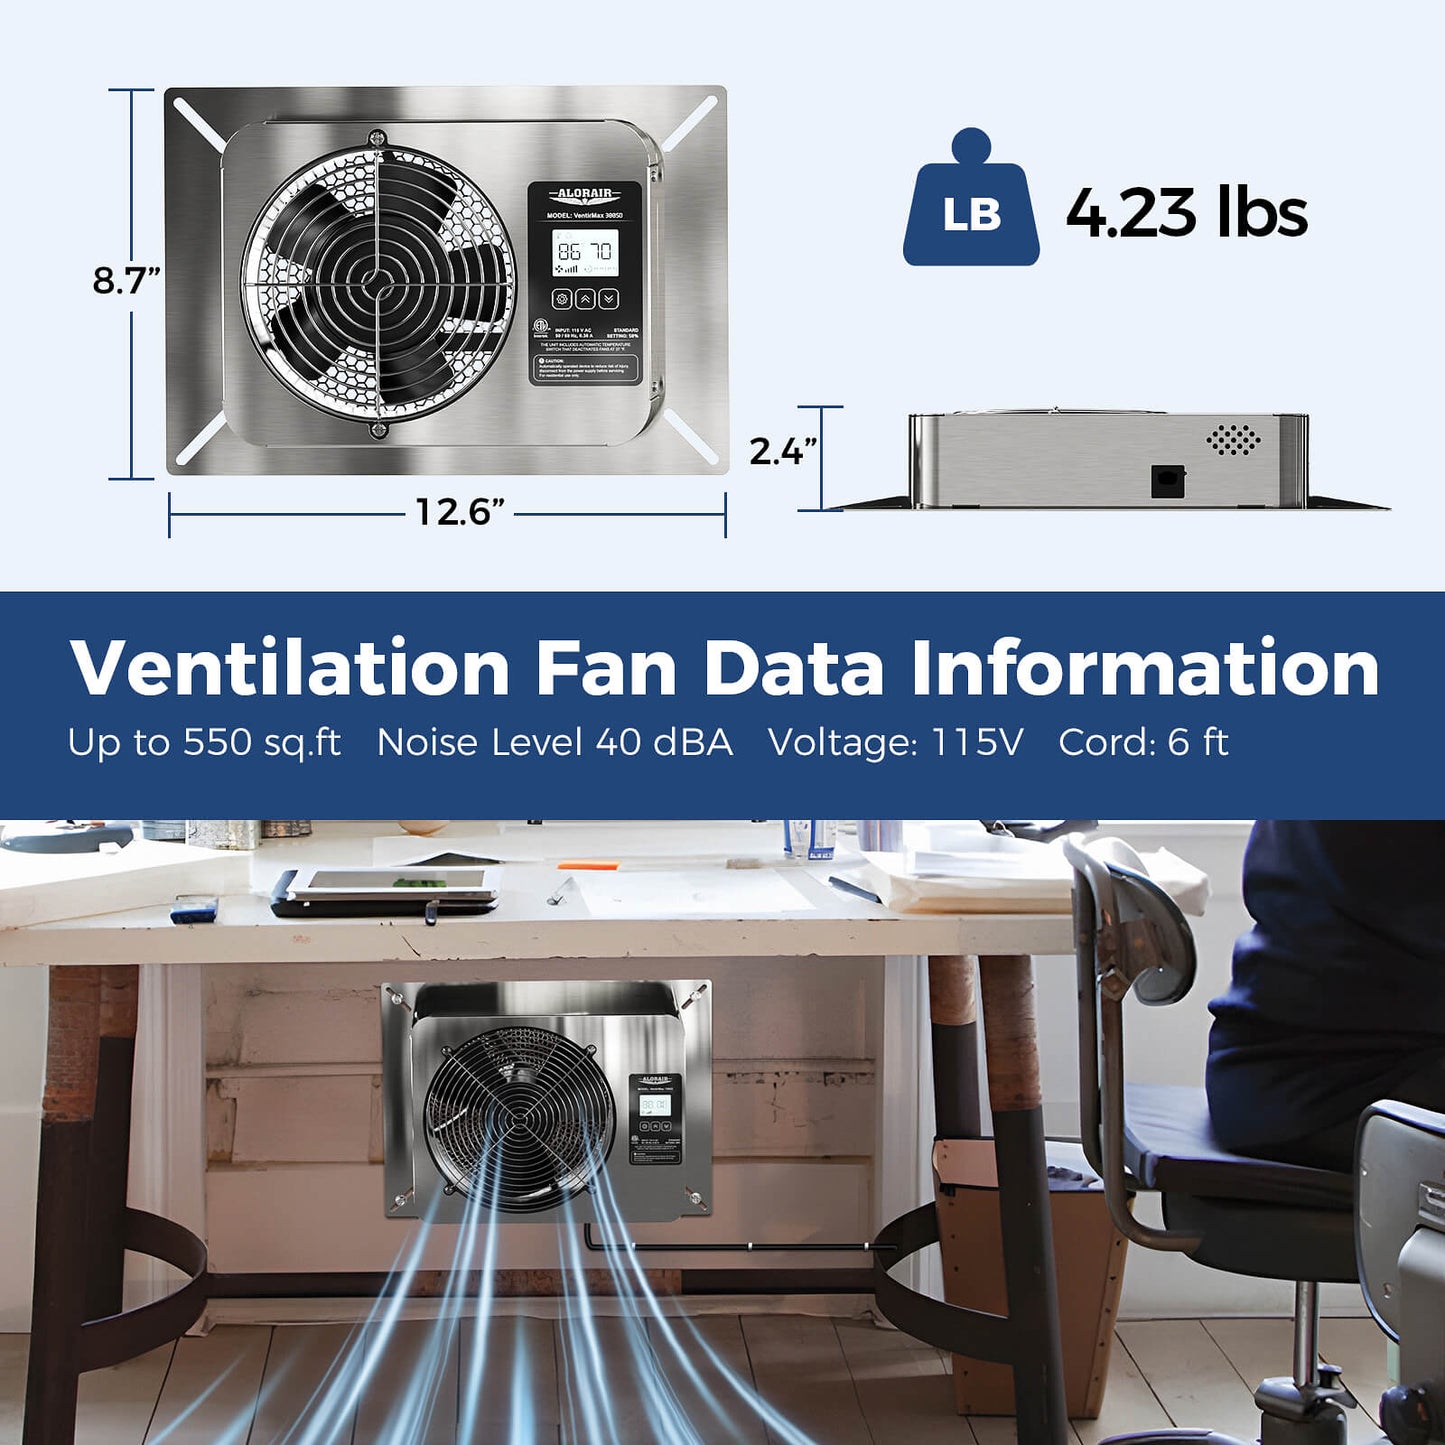 ALORAIR® VentirMax 300SD Ventilator Fan, IP55 Rated Exhaust Fan with Timing Cycle, Speed Control for Crawl space, Attic AlorAir